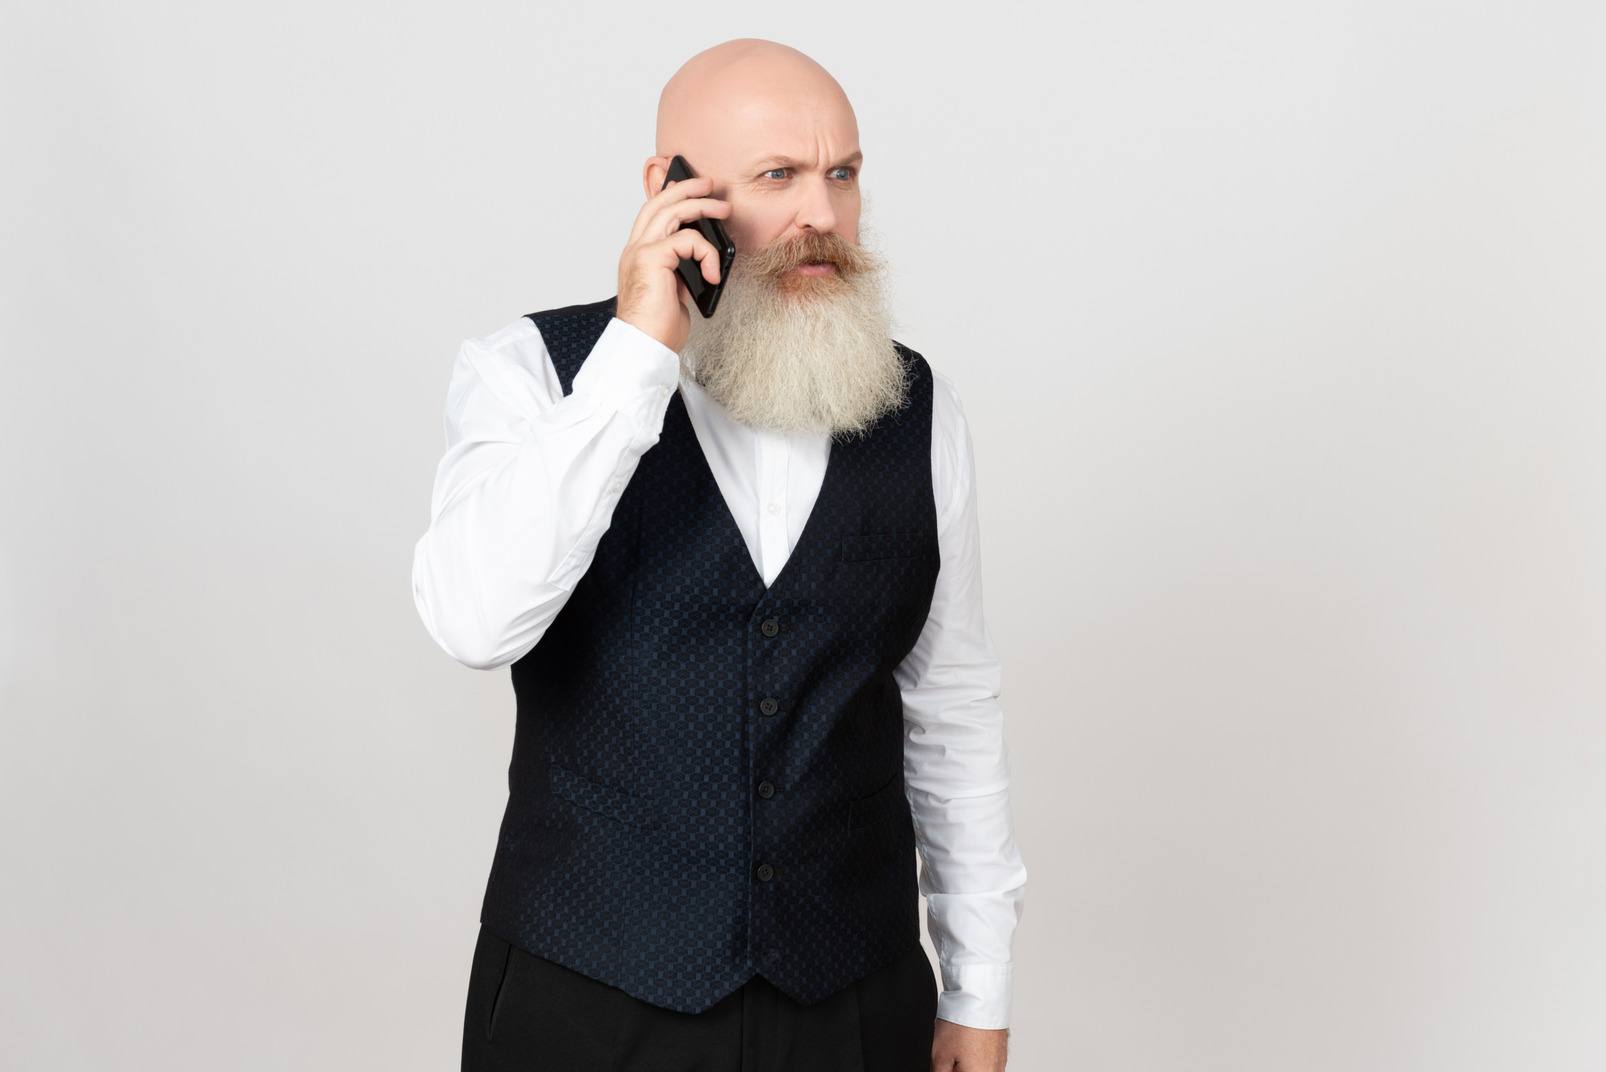 Aged man involved in phone conversation